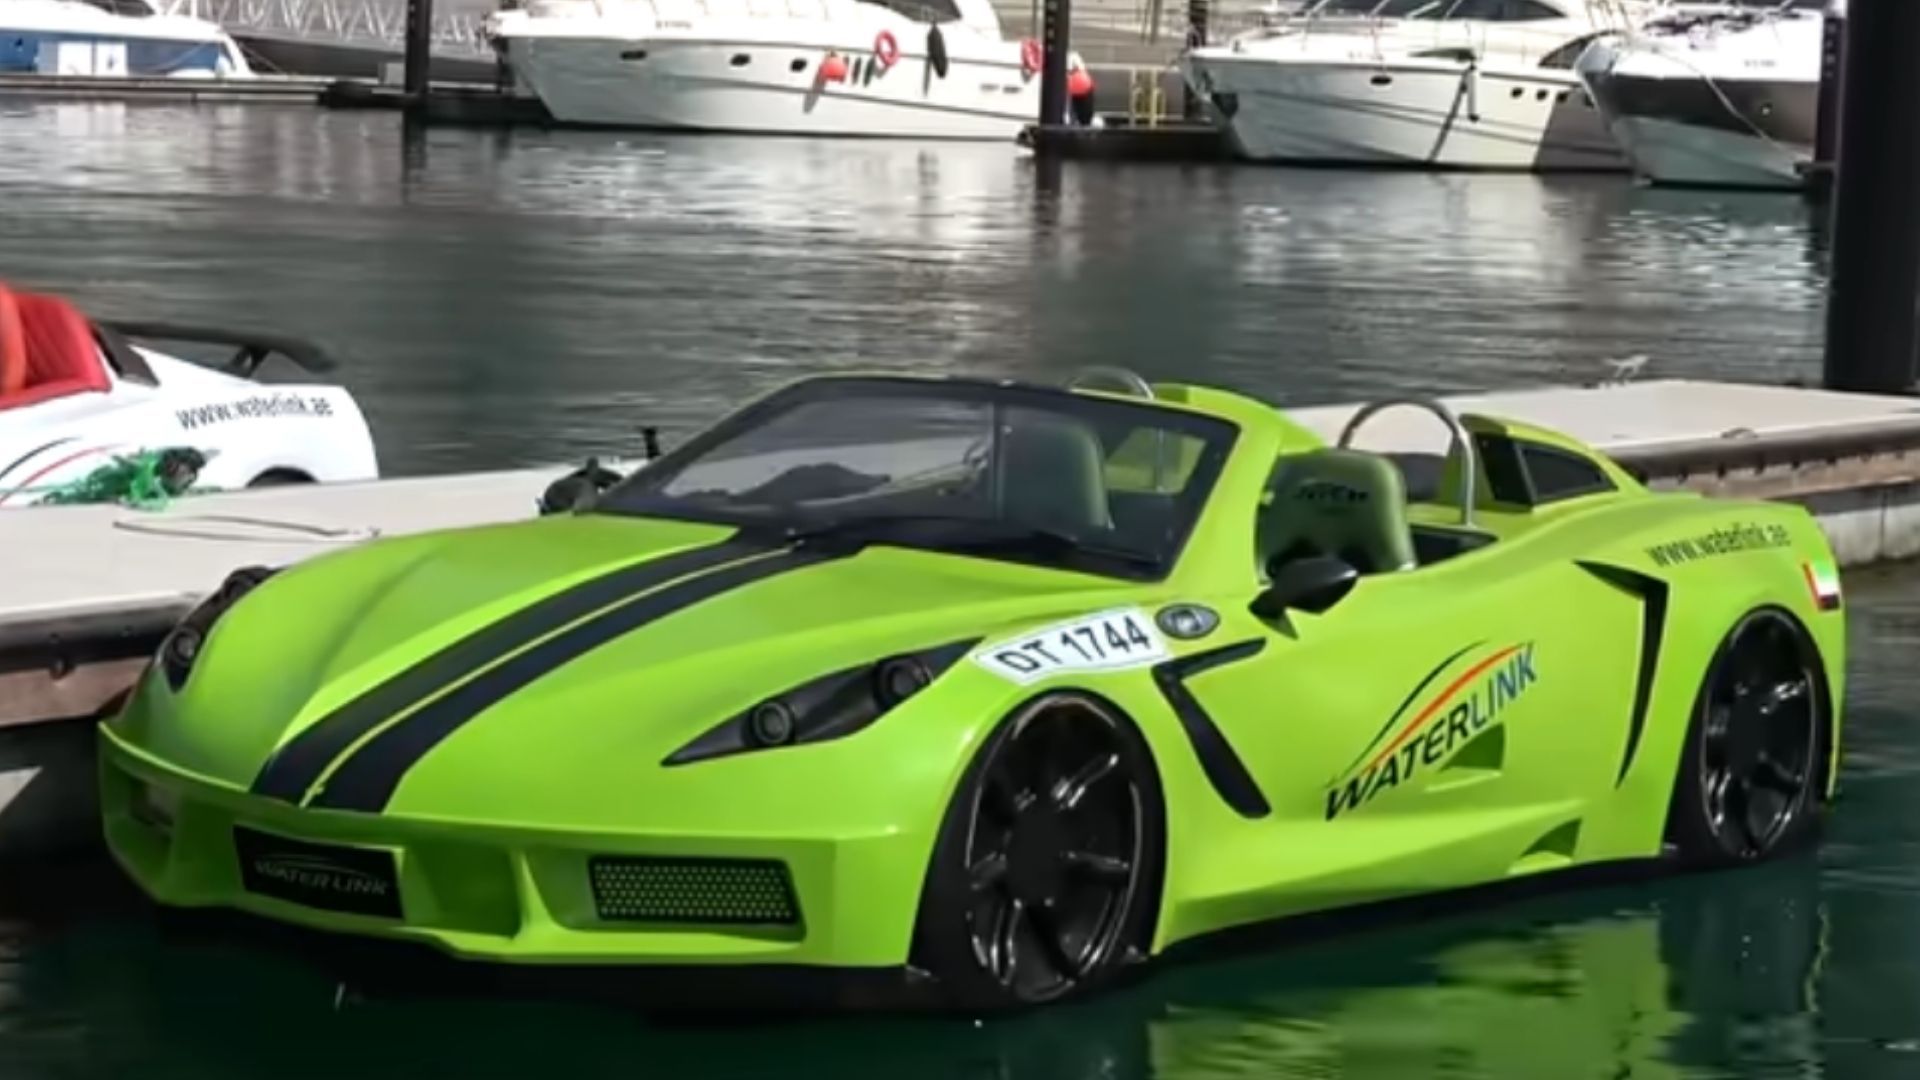 This Corvette drives on water!